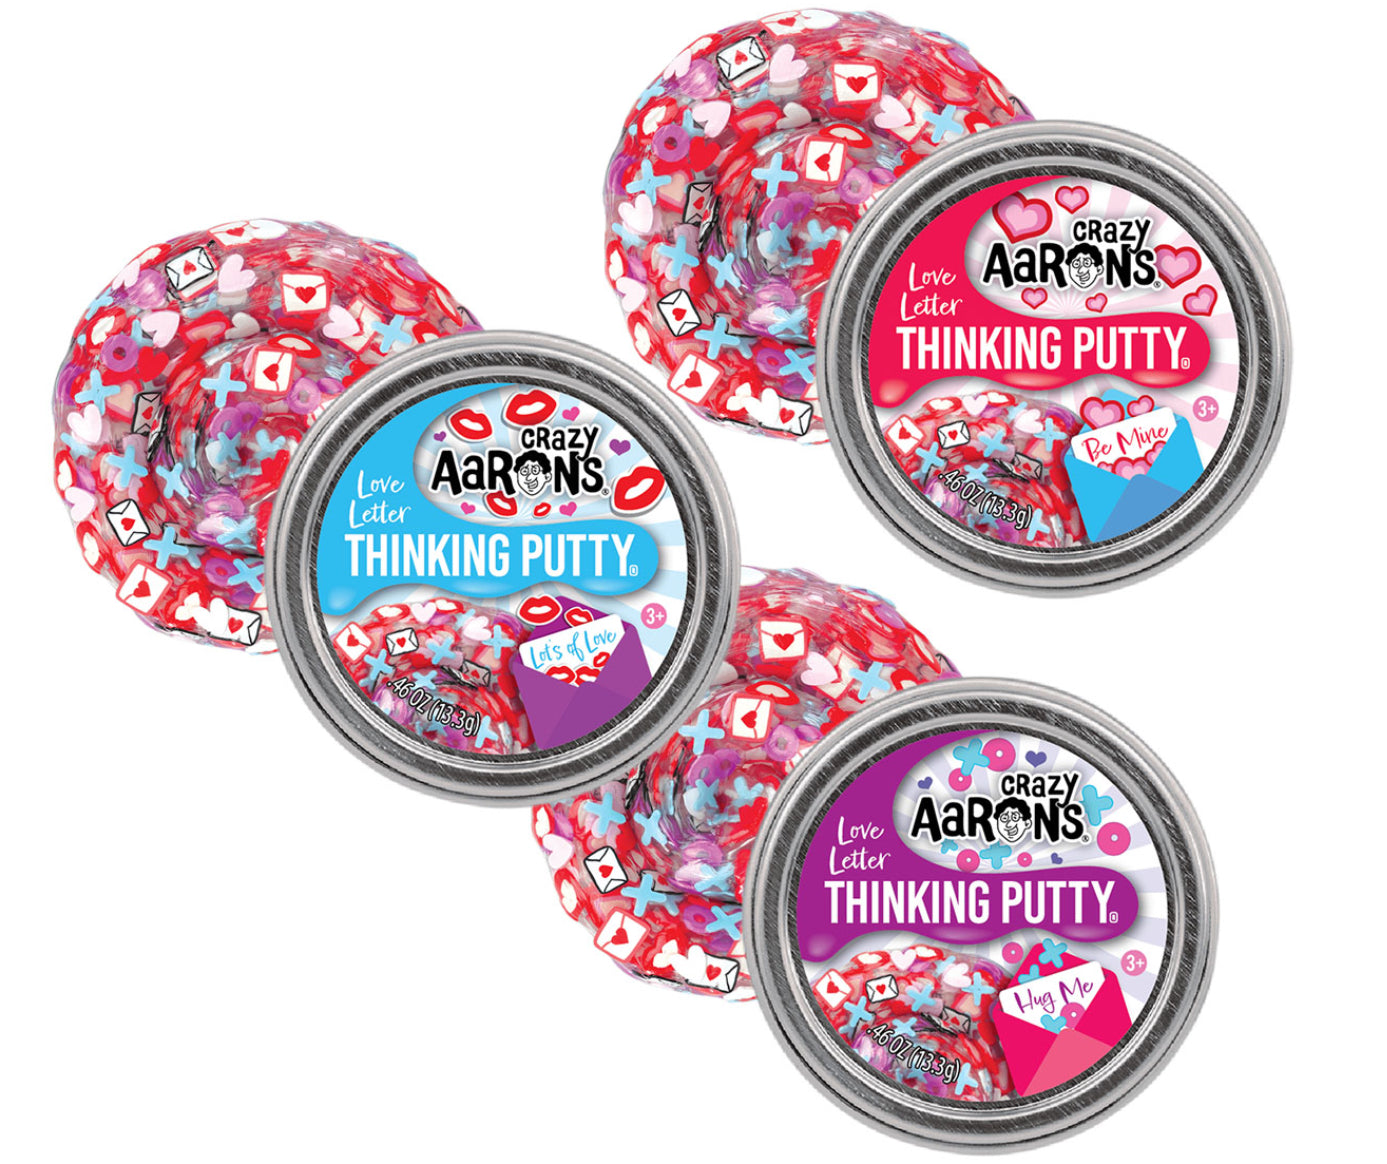 2” Love Letter Thinking Putty Tin by Crazy Aaron’s #VT003